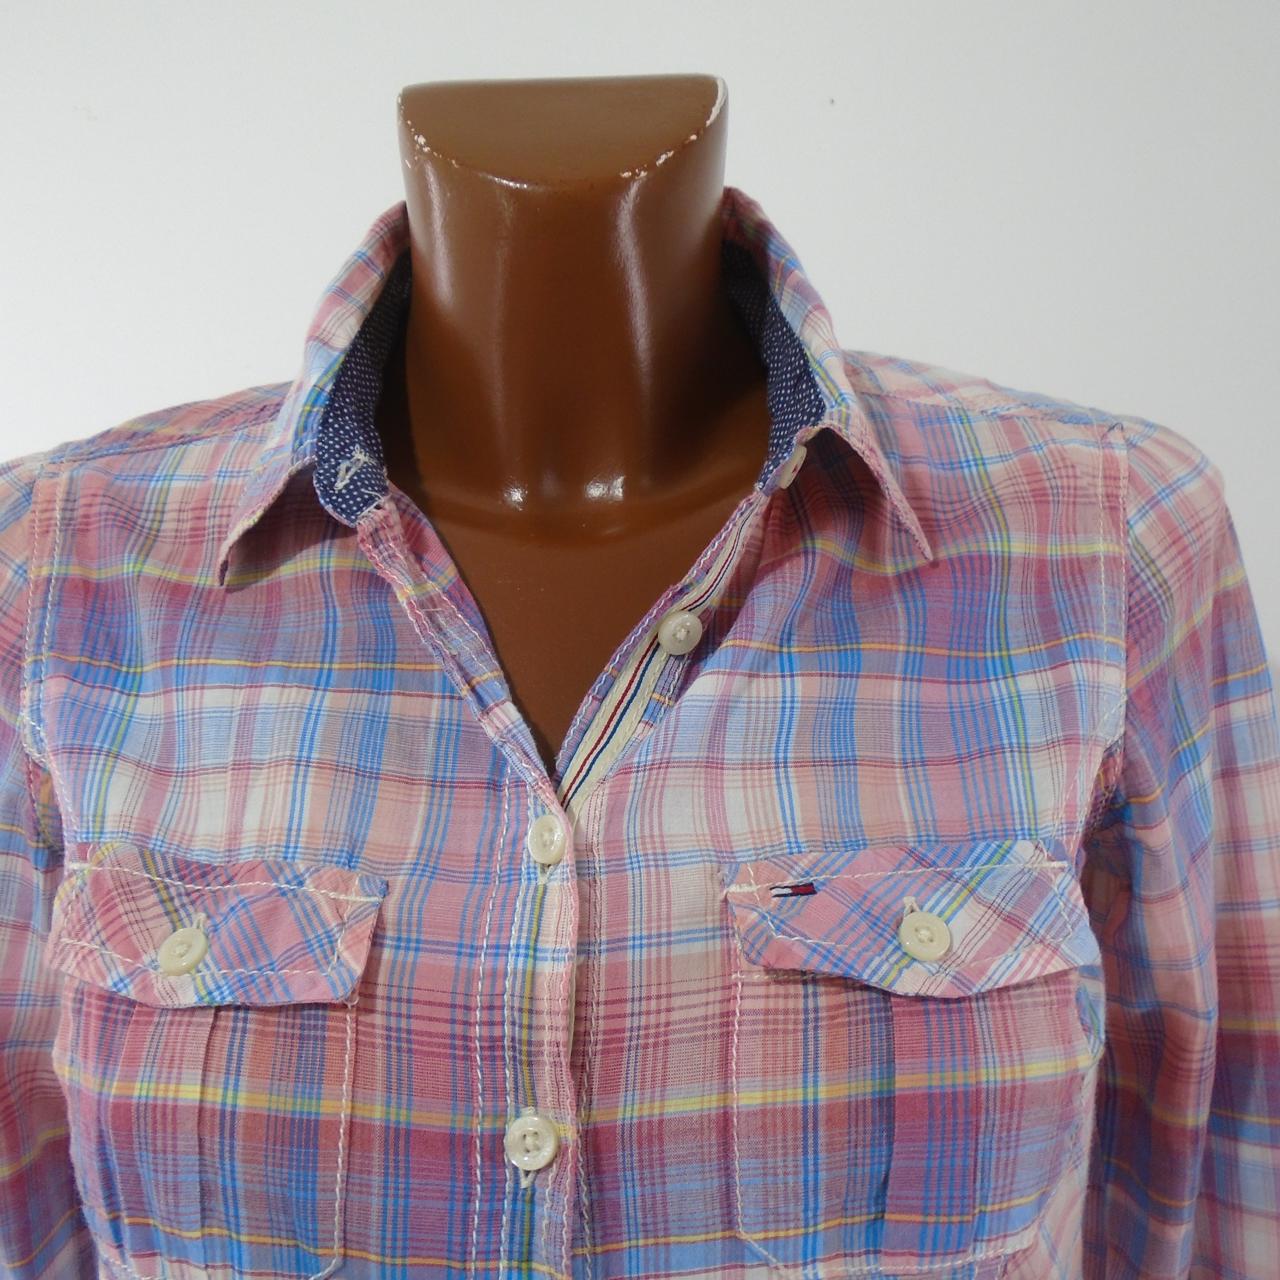 Women's Shirt Tommy Hilfiger. Multicolor. S. Used. Good